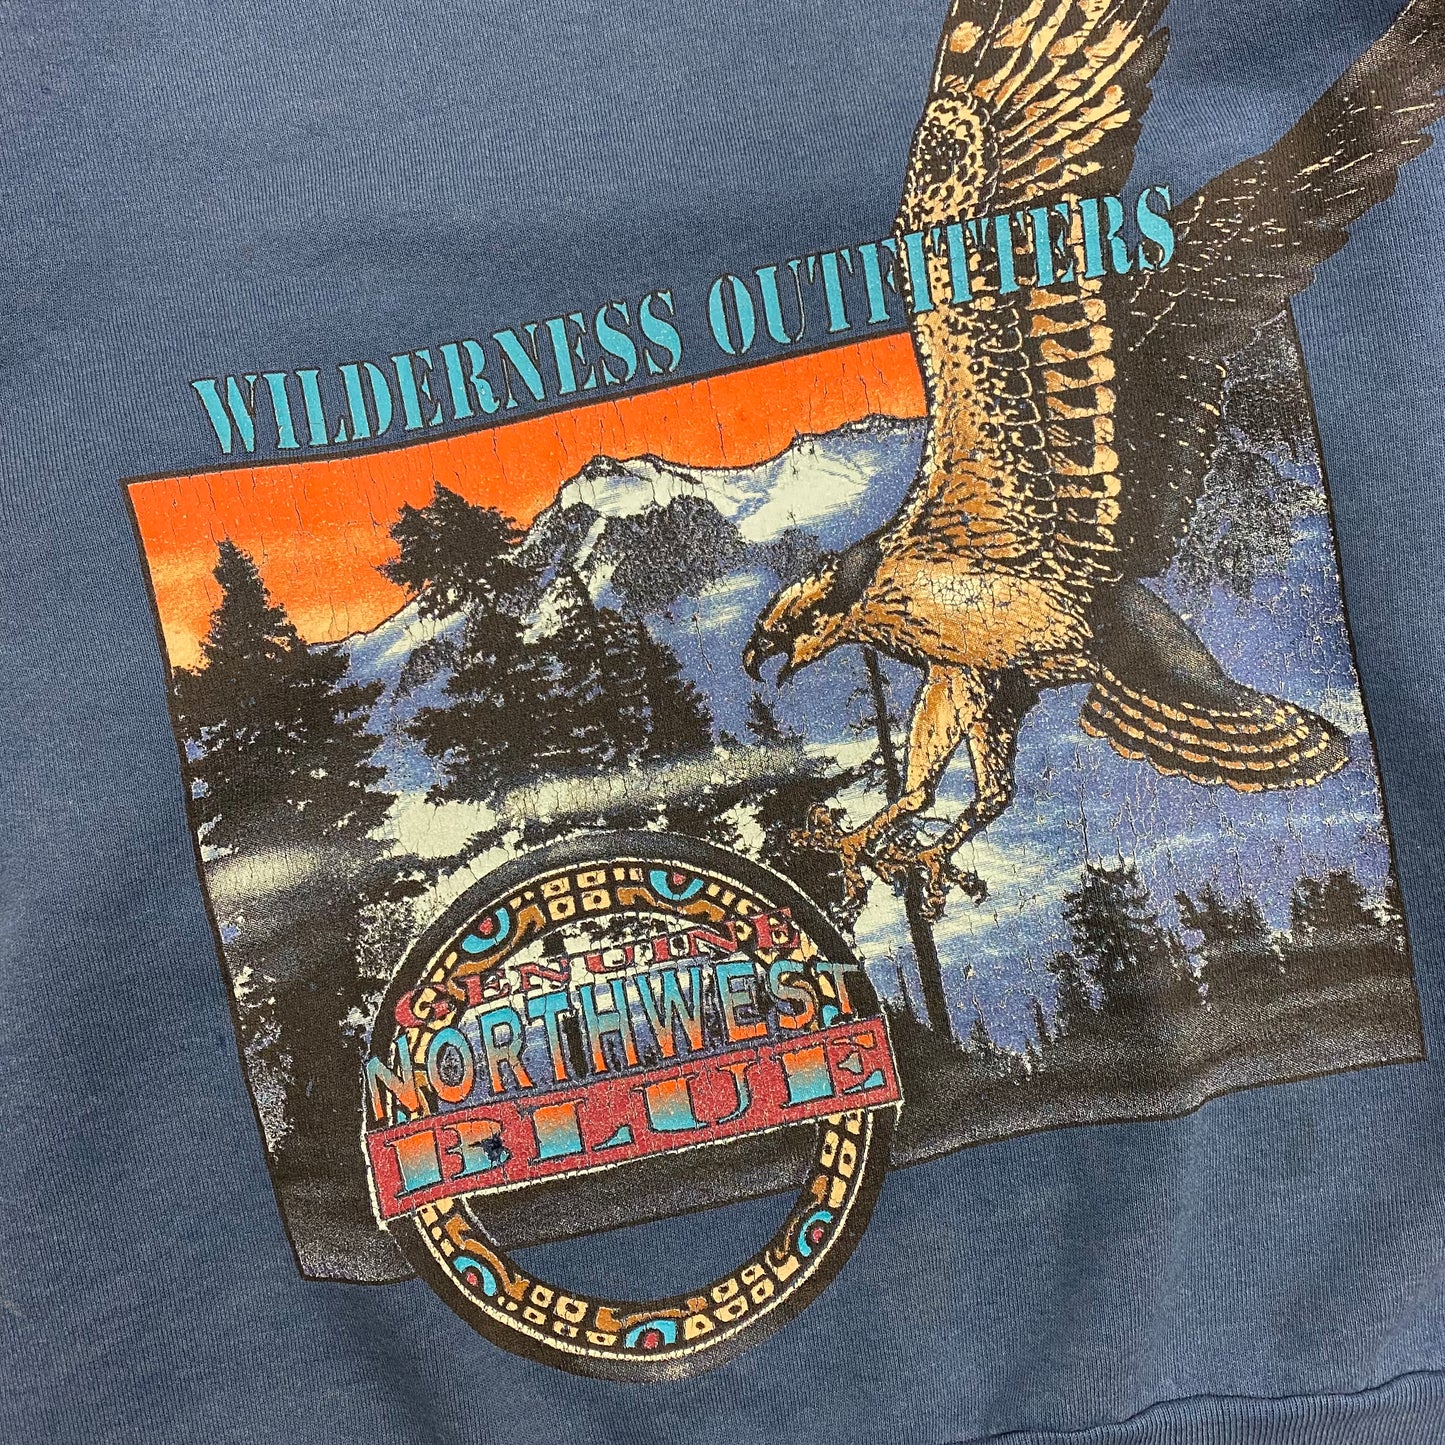 Vintage 1990s Wilderness Outfitters "Northwest Blue" Crewneck - Size Large